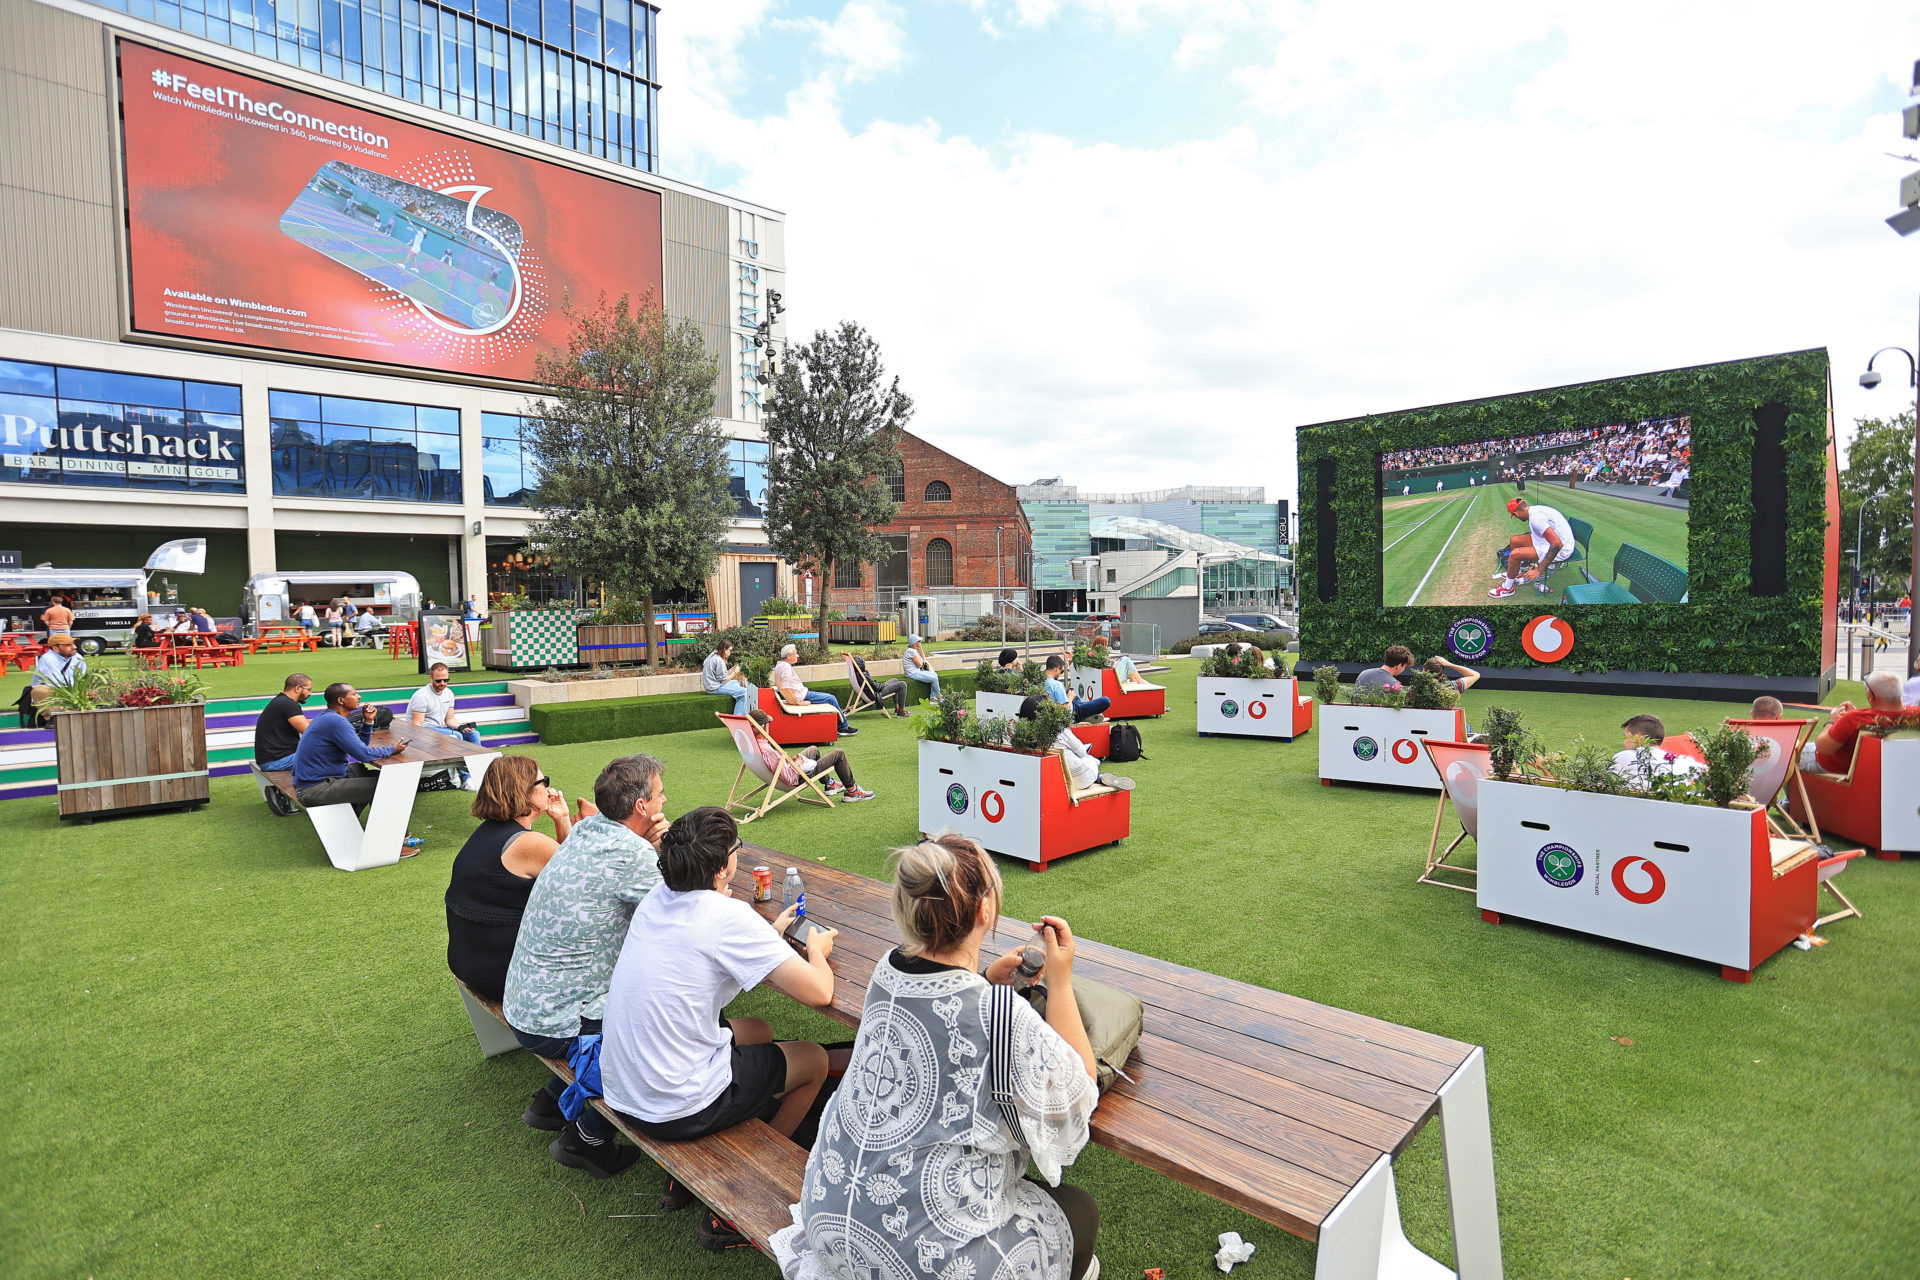 Ocean brings Wimbledon Experience to W12 and SW11 in partnership with Vodafone Ocean Outdoor